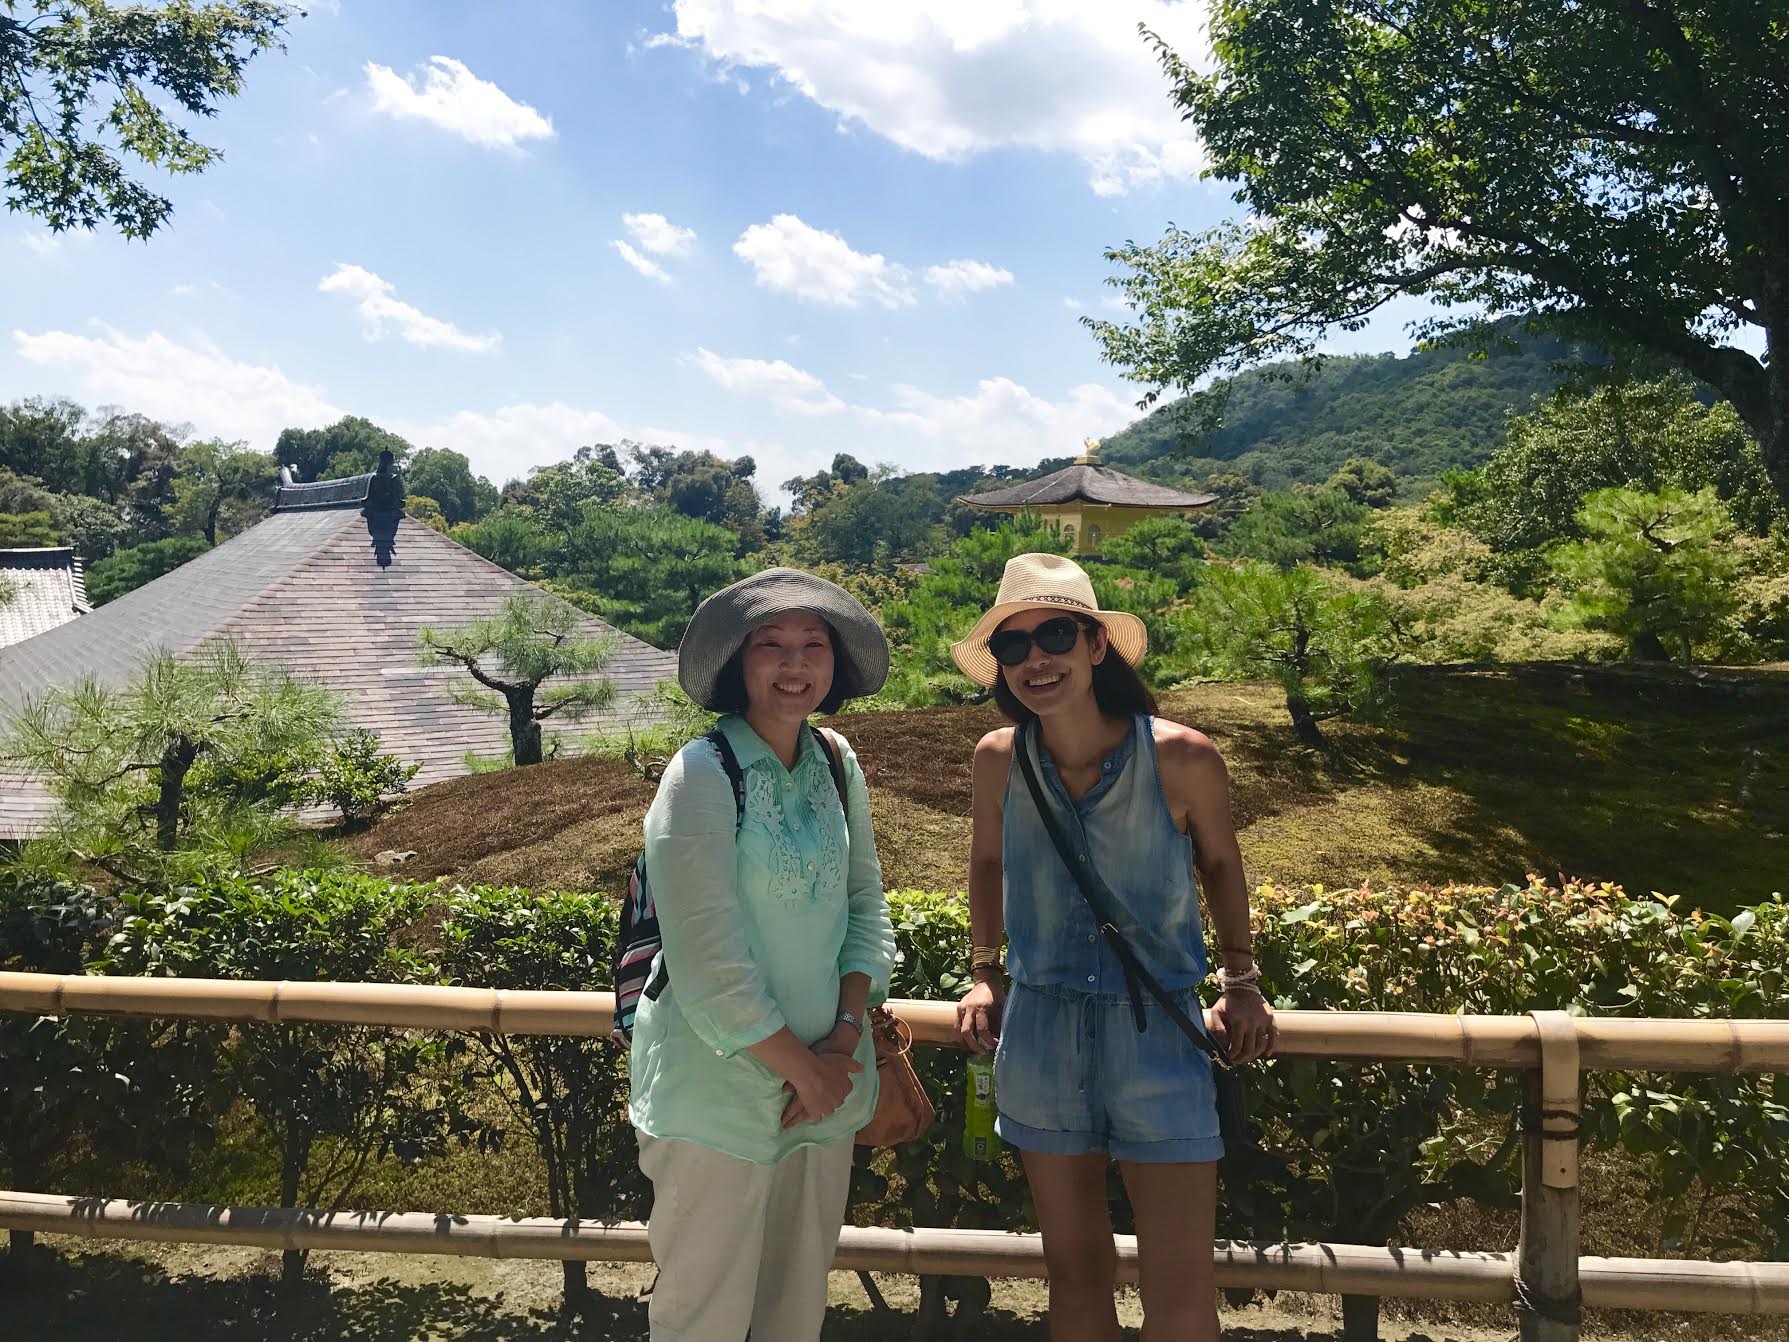 Picture of Kimberly and friend in Japan.